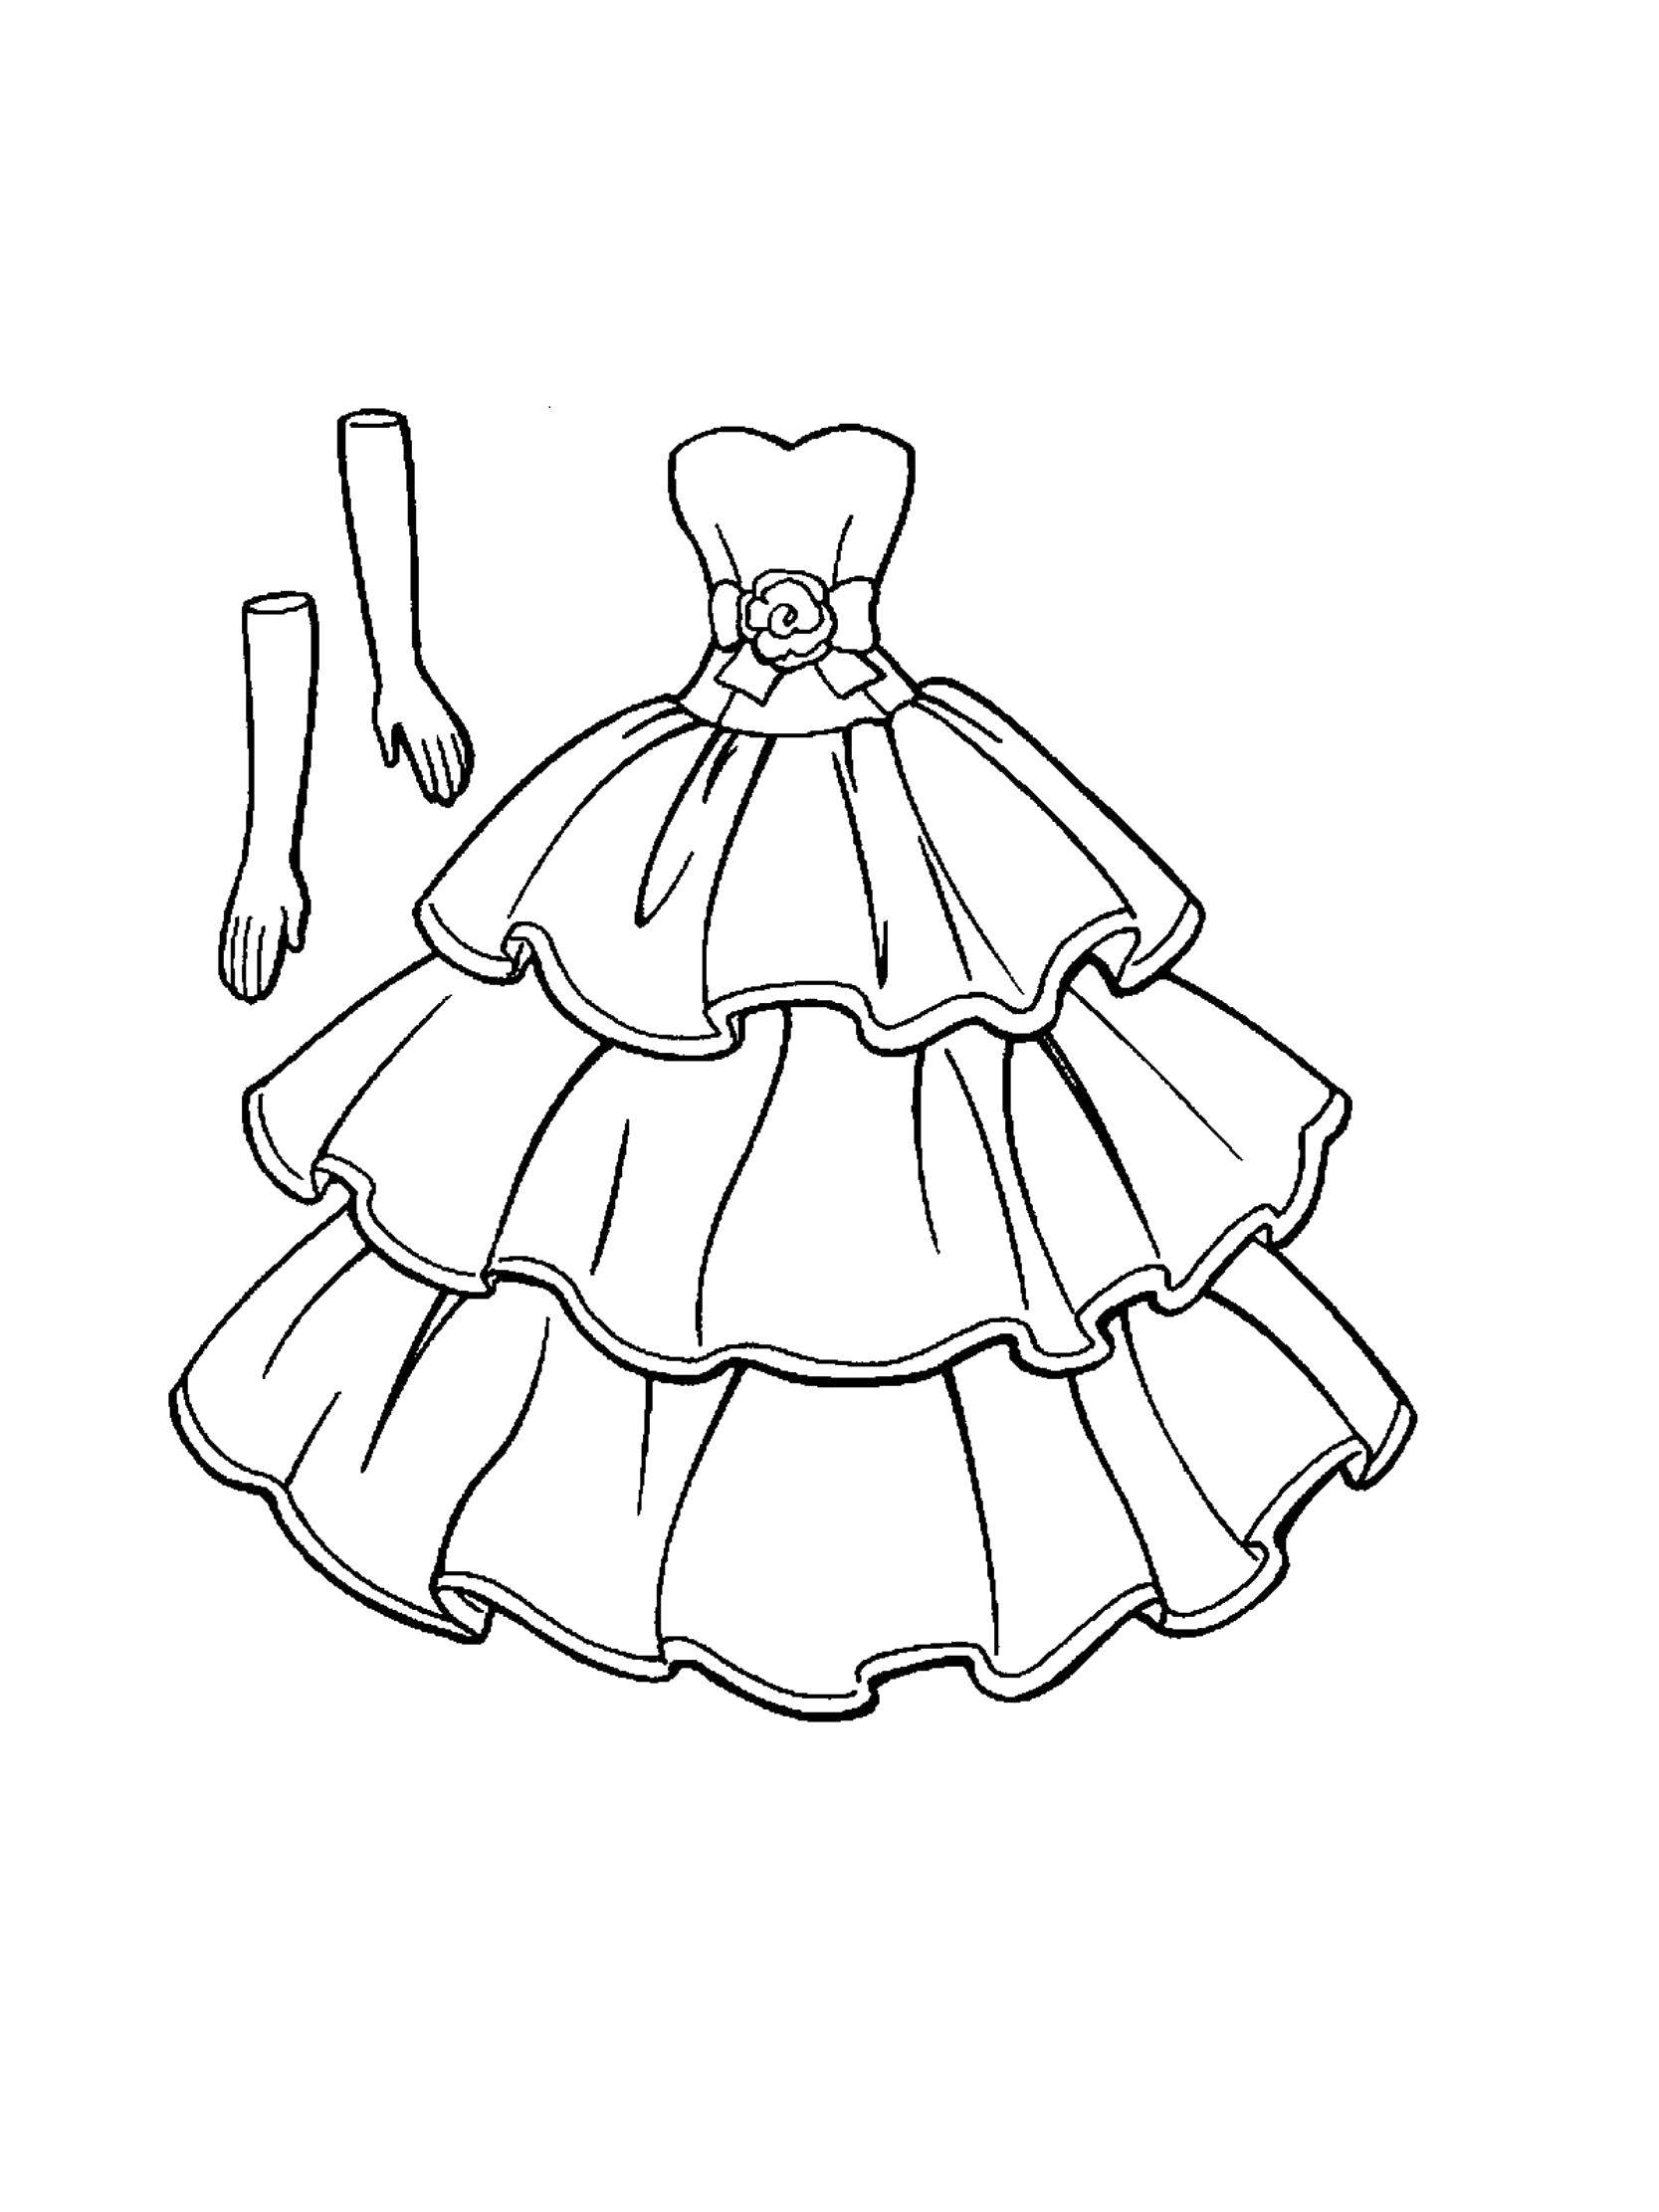 Coloring Beautiful Princess dress with flower and gloves. Category clothing. Tags:  Clothing, dress.